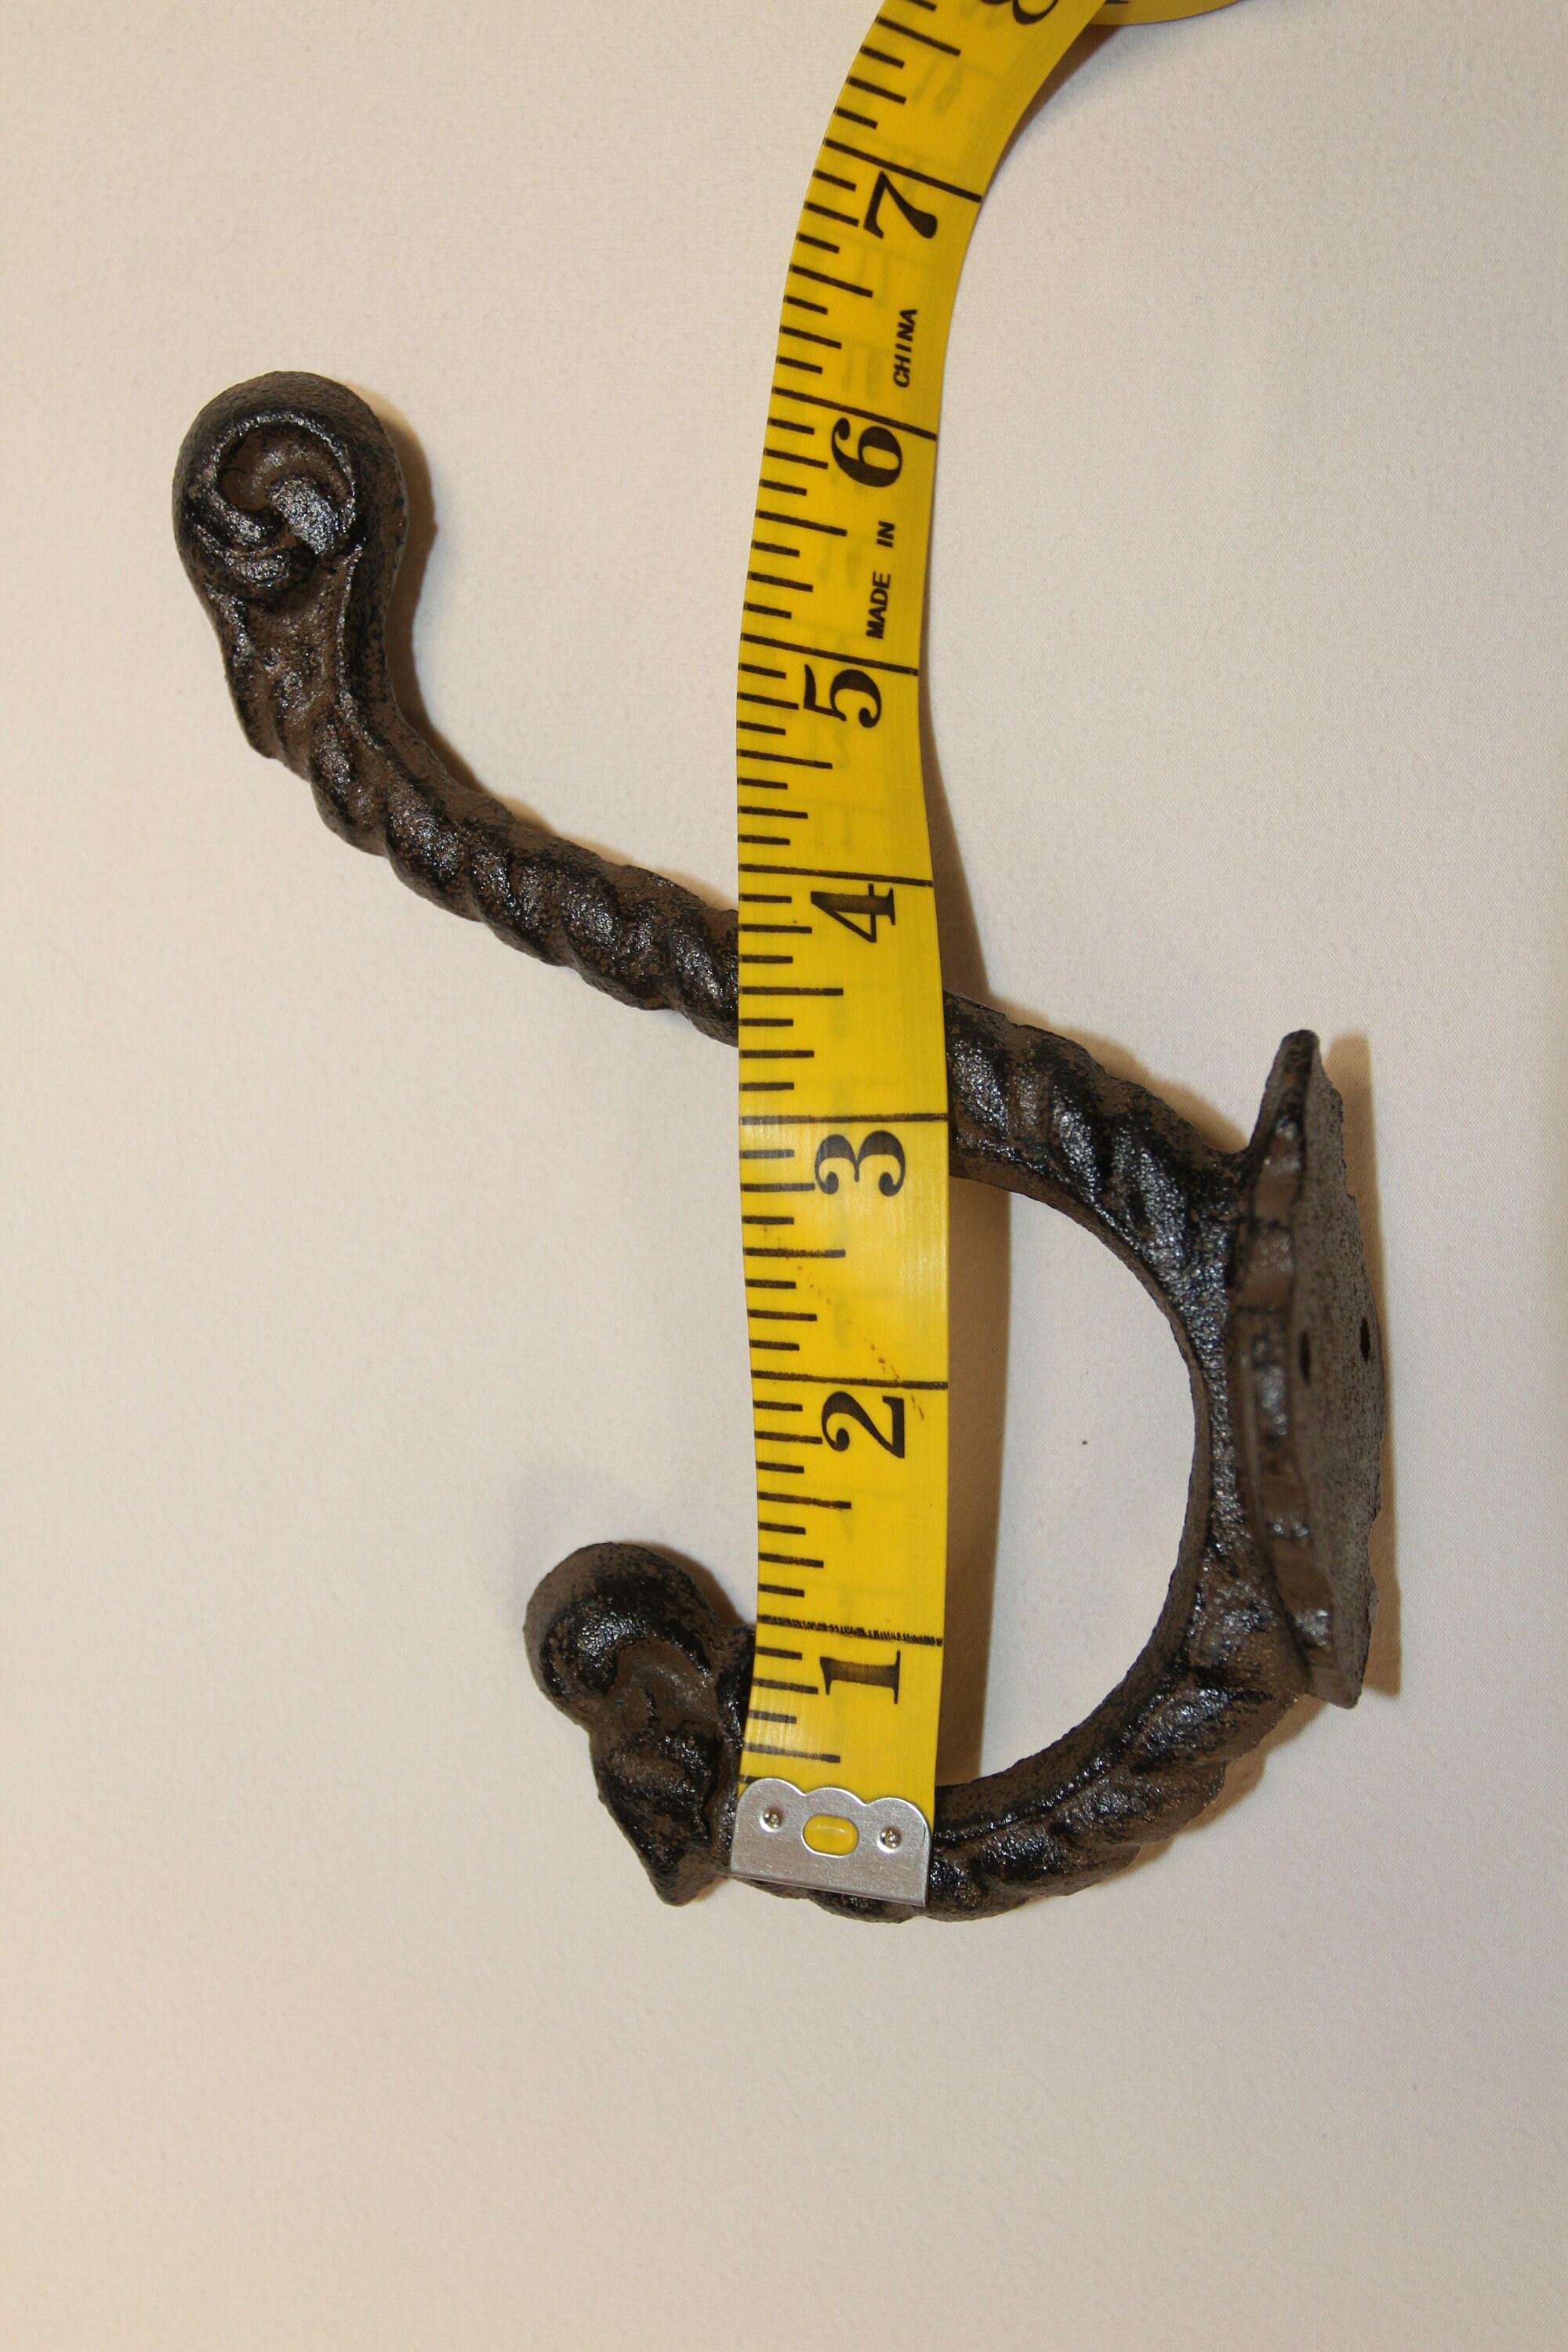 Western Star Welcome Plaque Cast Iron Wall Hooks 5 items 